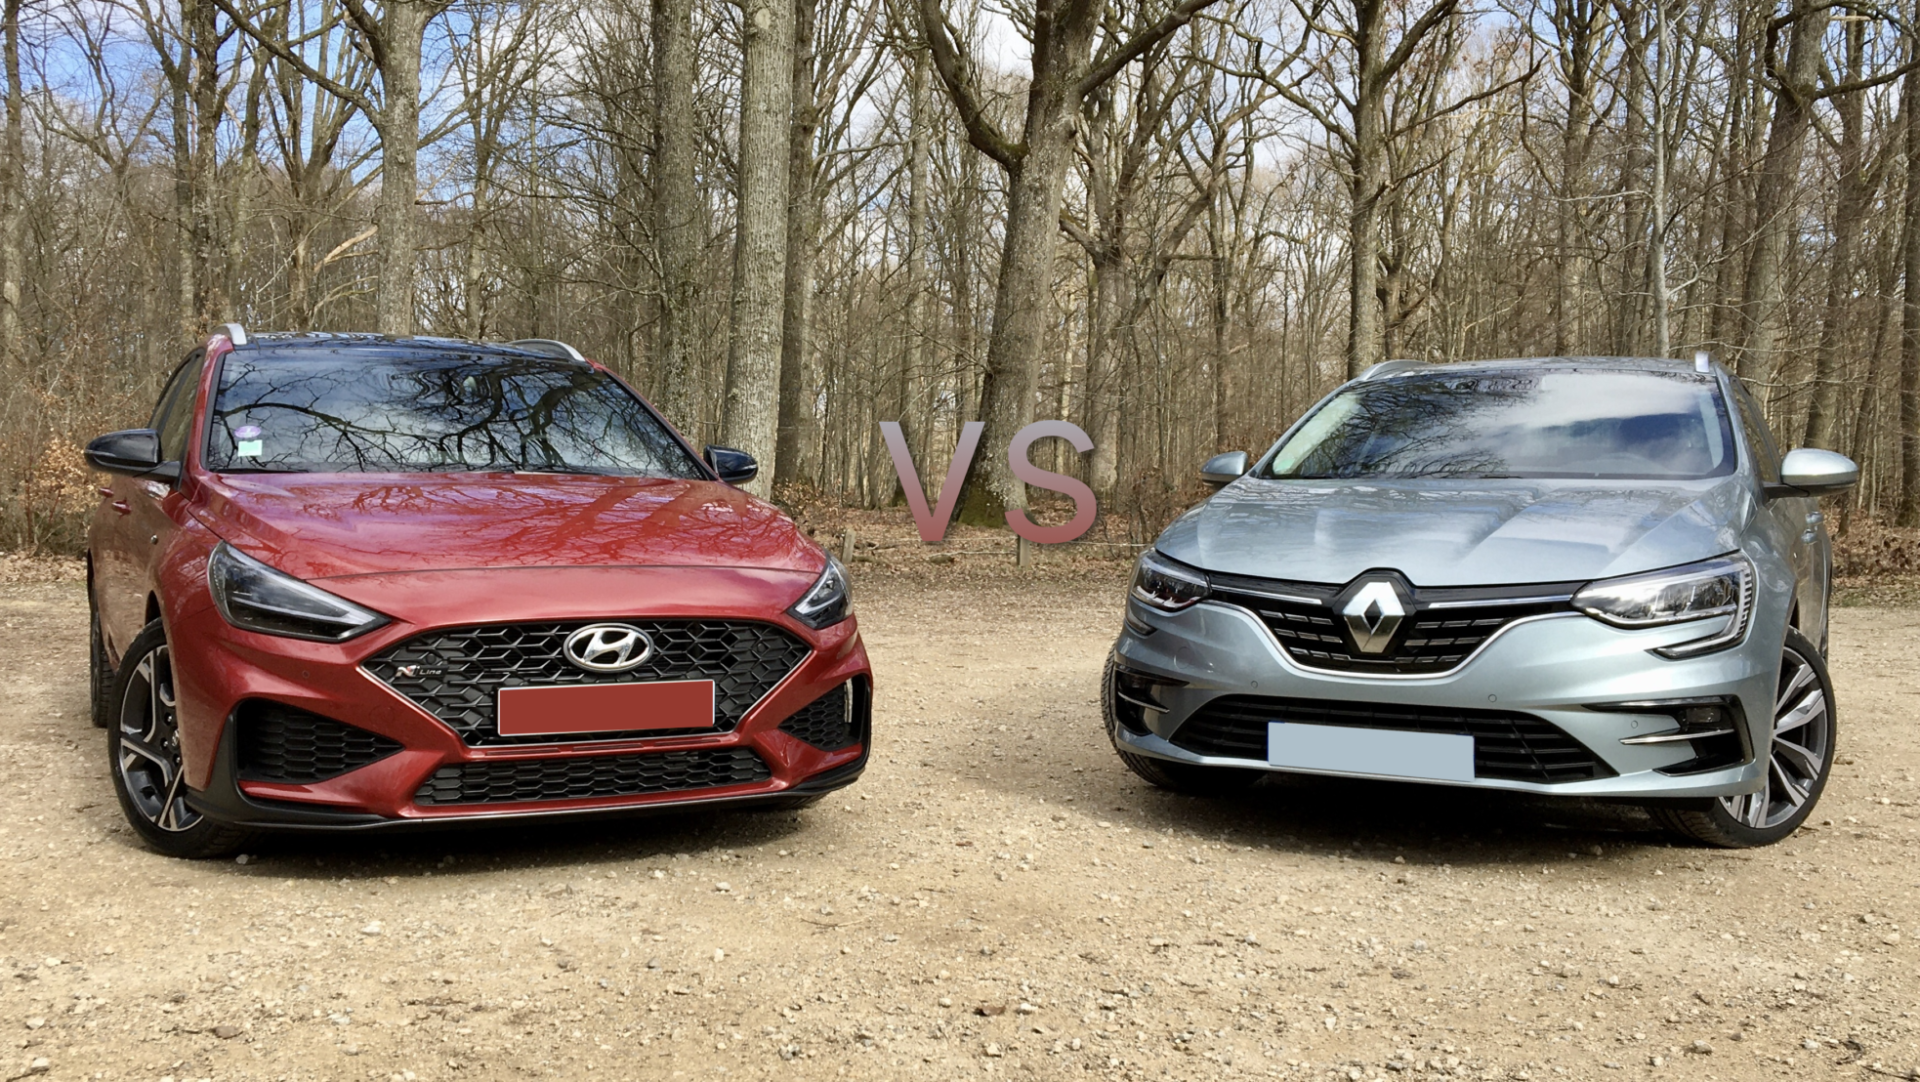 Hyundai vs. Renault: Comparing Features, Performance, and More